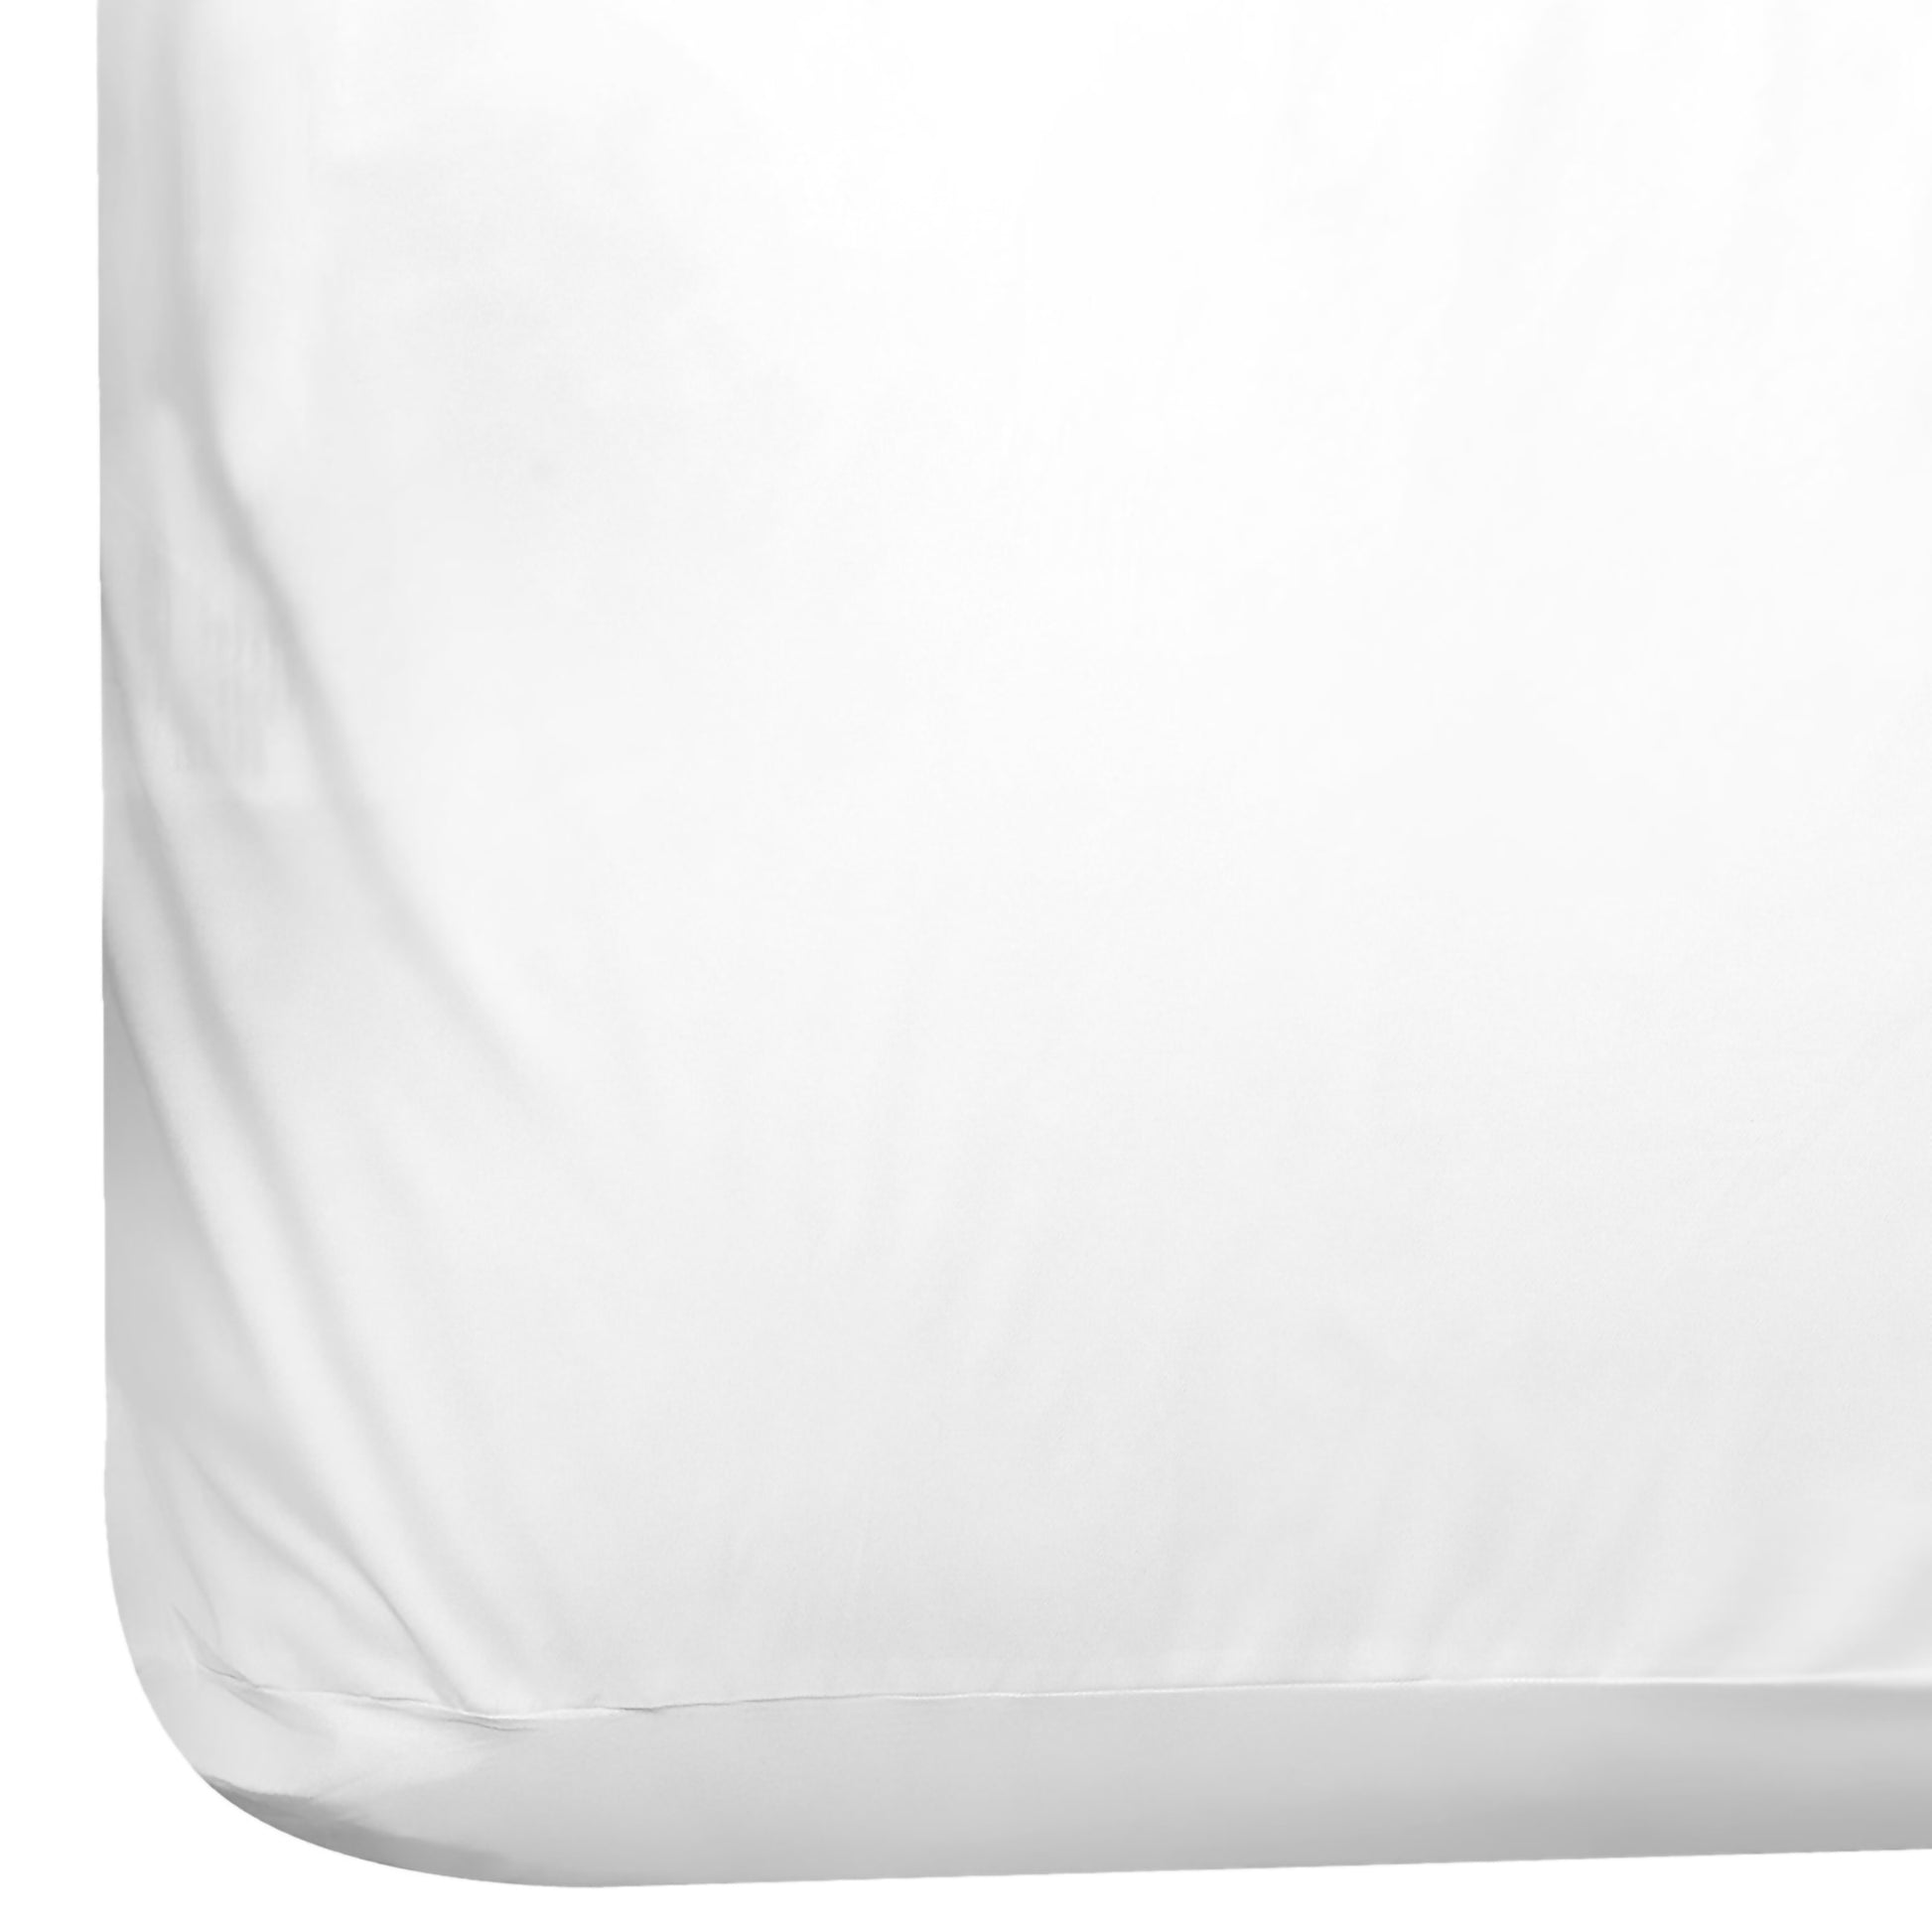 Mabis Pillow Protector, 21 X 27 Inch, Sold As 1/Each Mabis 554-8042-1900